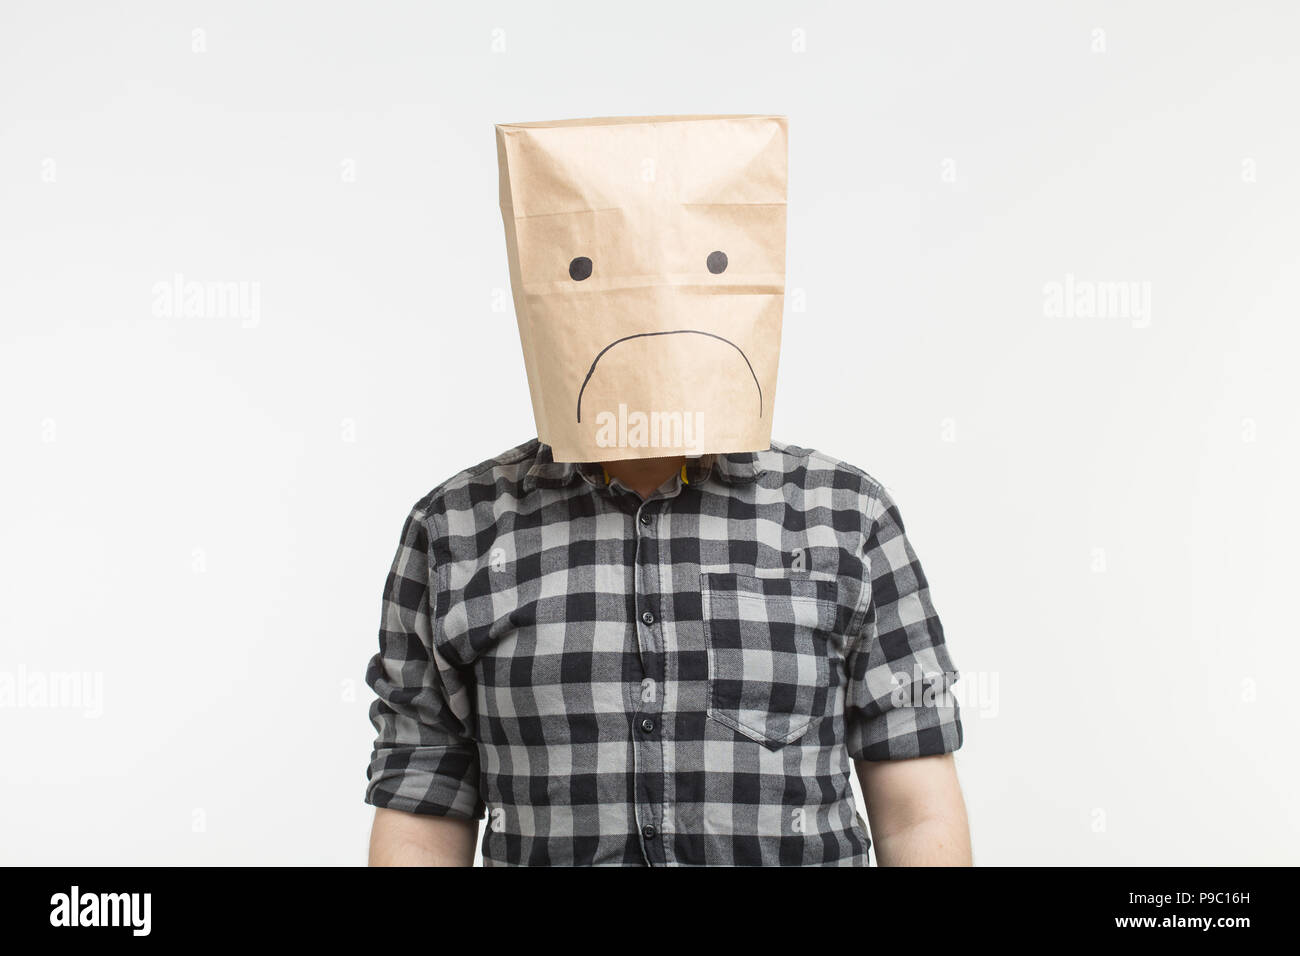 unhappy-man-with-sad-emoticon-in-front-of-paper-bag-on-his-head-on-white-background-P9C16H.jpg